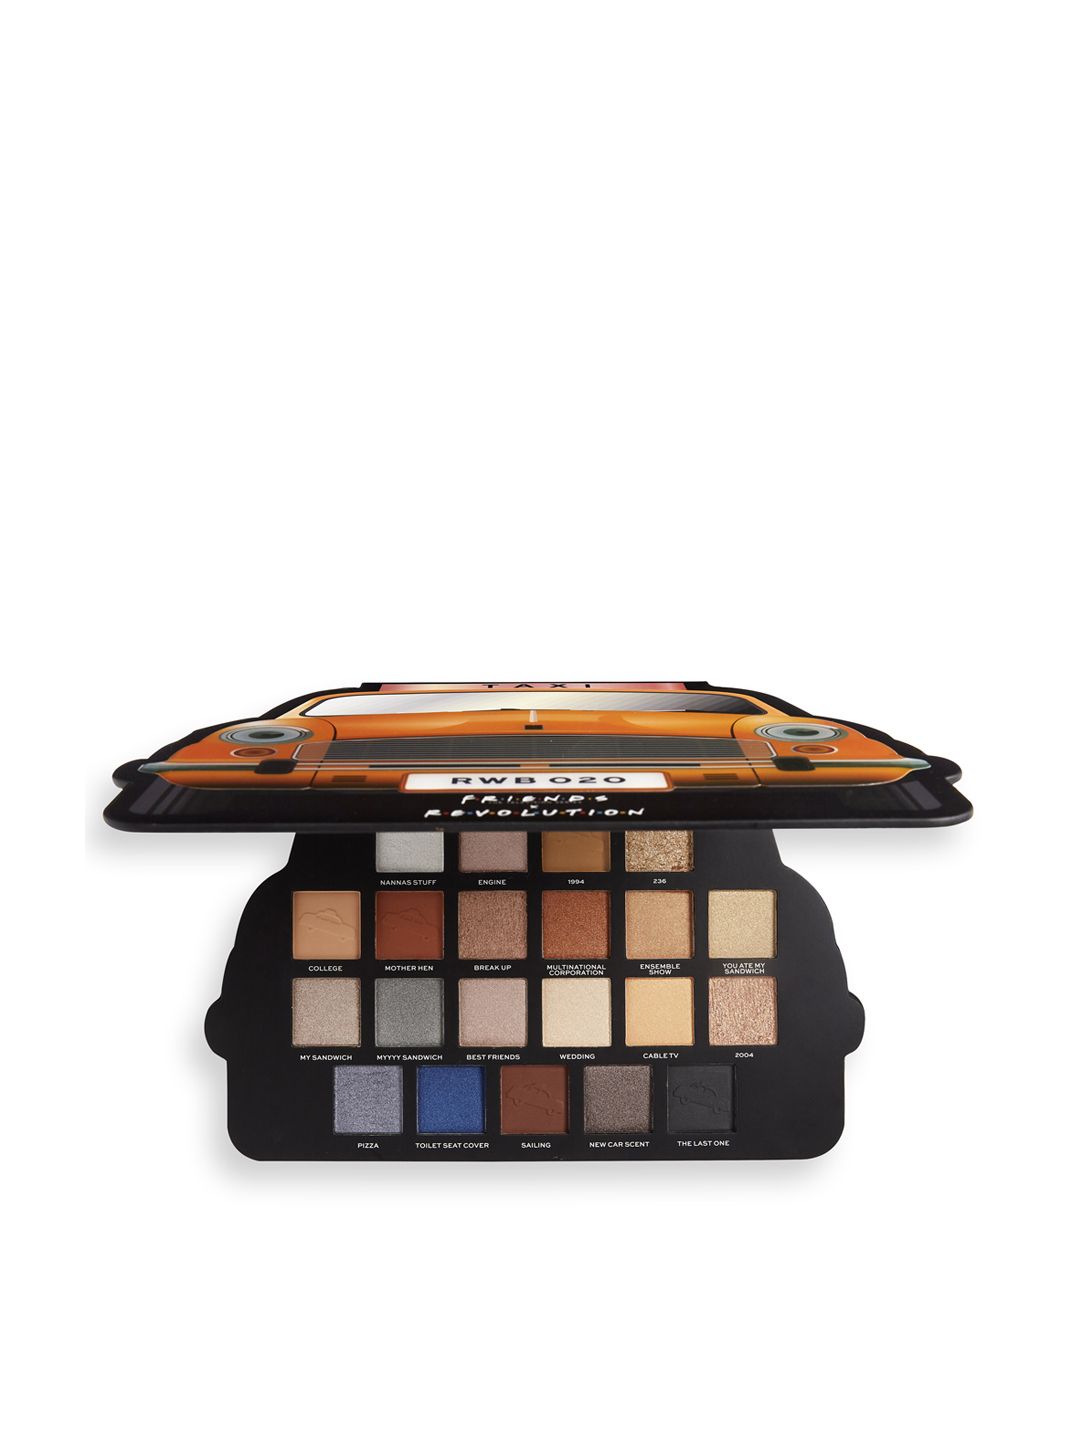 Makeup Revolution London X Friends Take A Drive Eyeshadow Palette Price in India